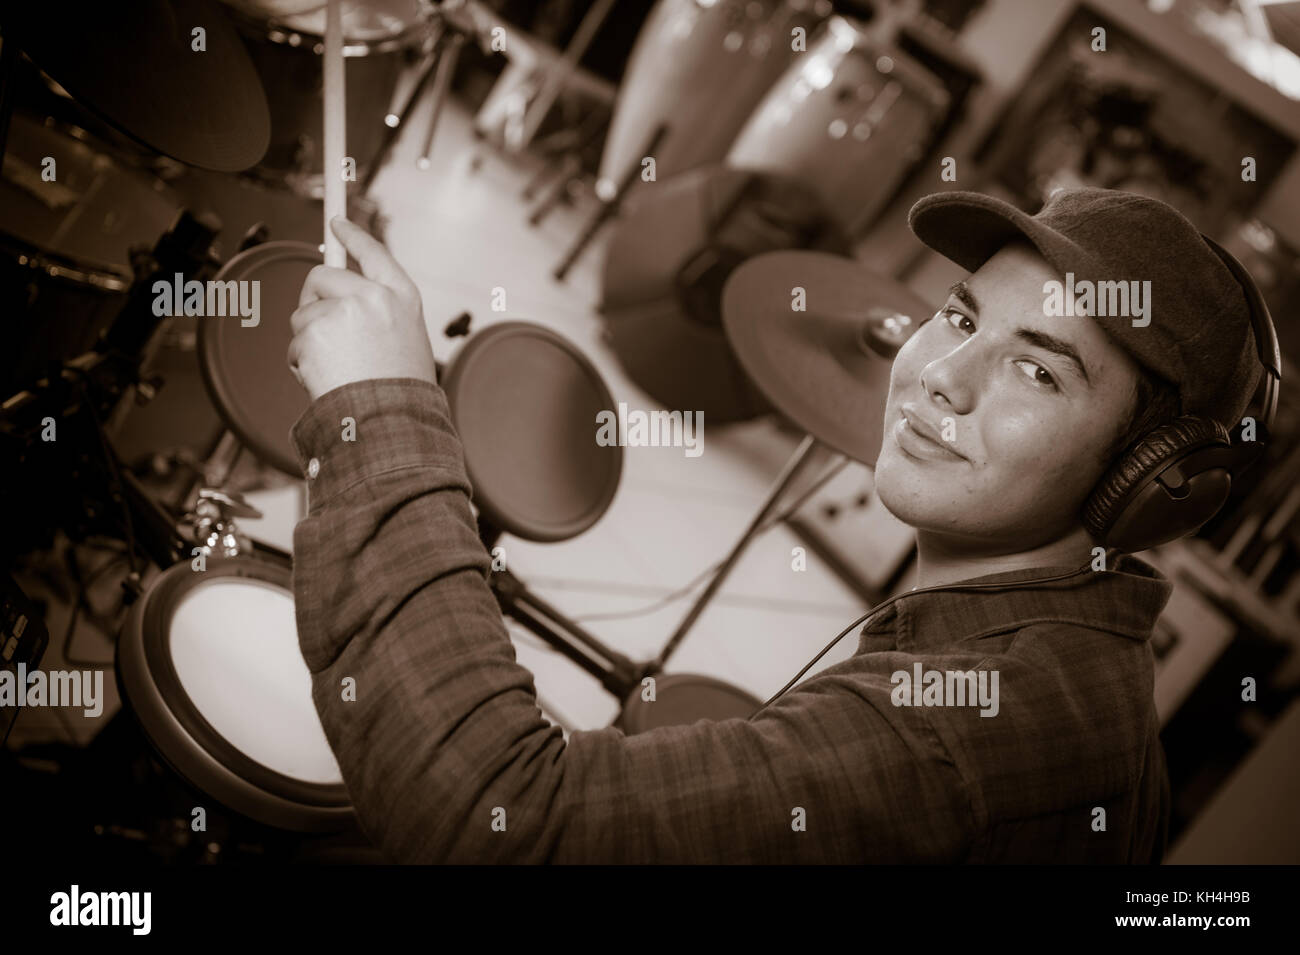 Young blond caucasian boy plays drums in shop, france Stock Photo